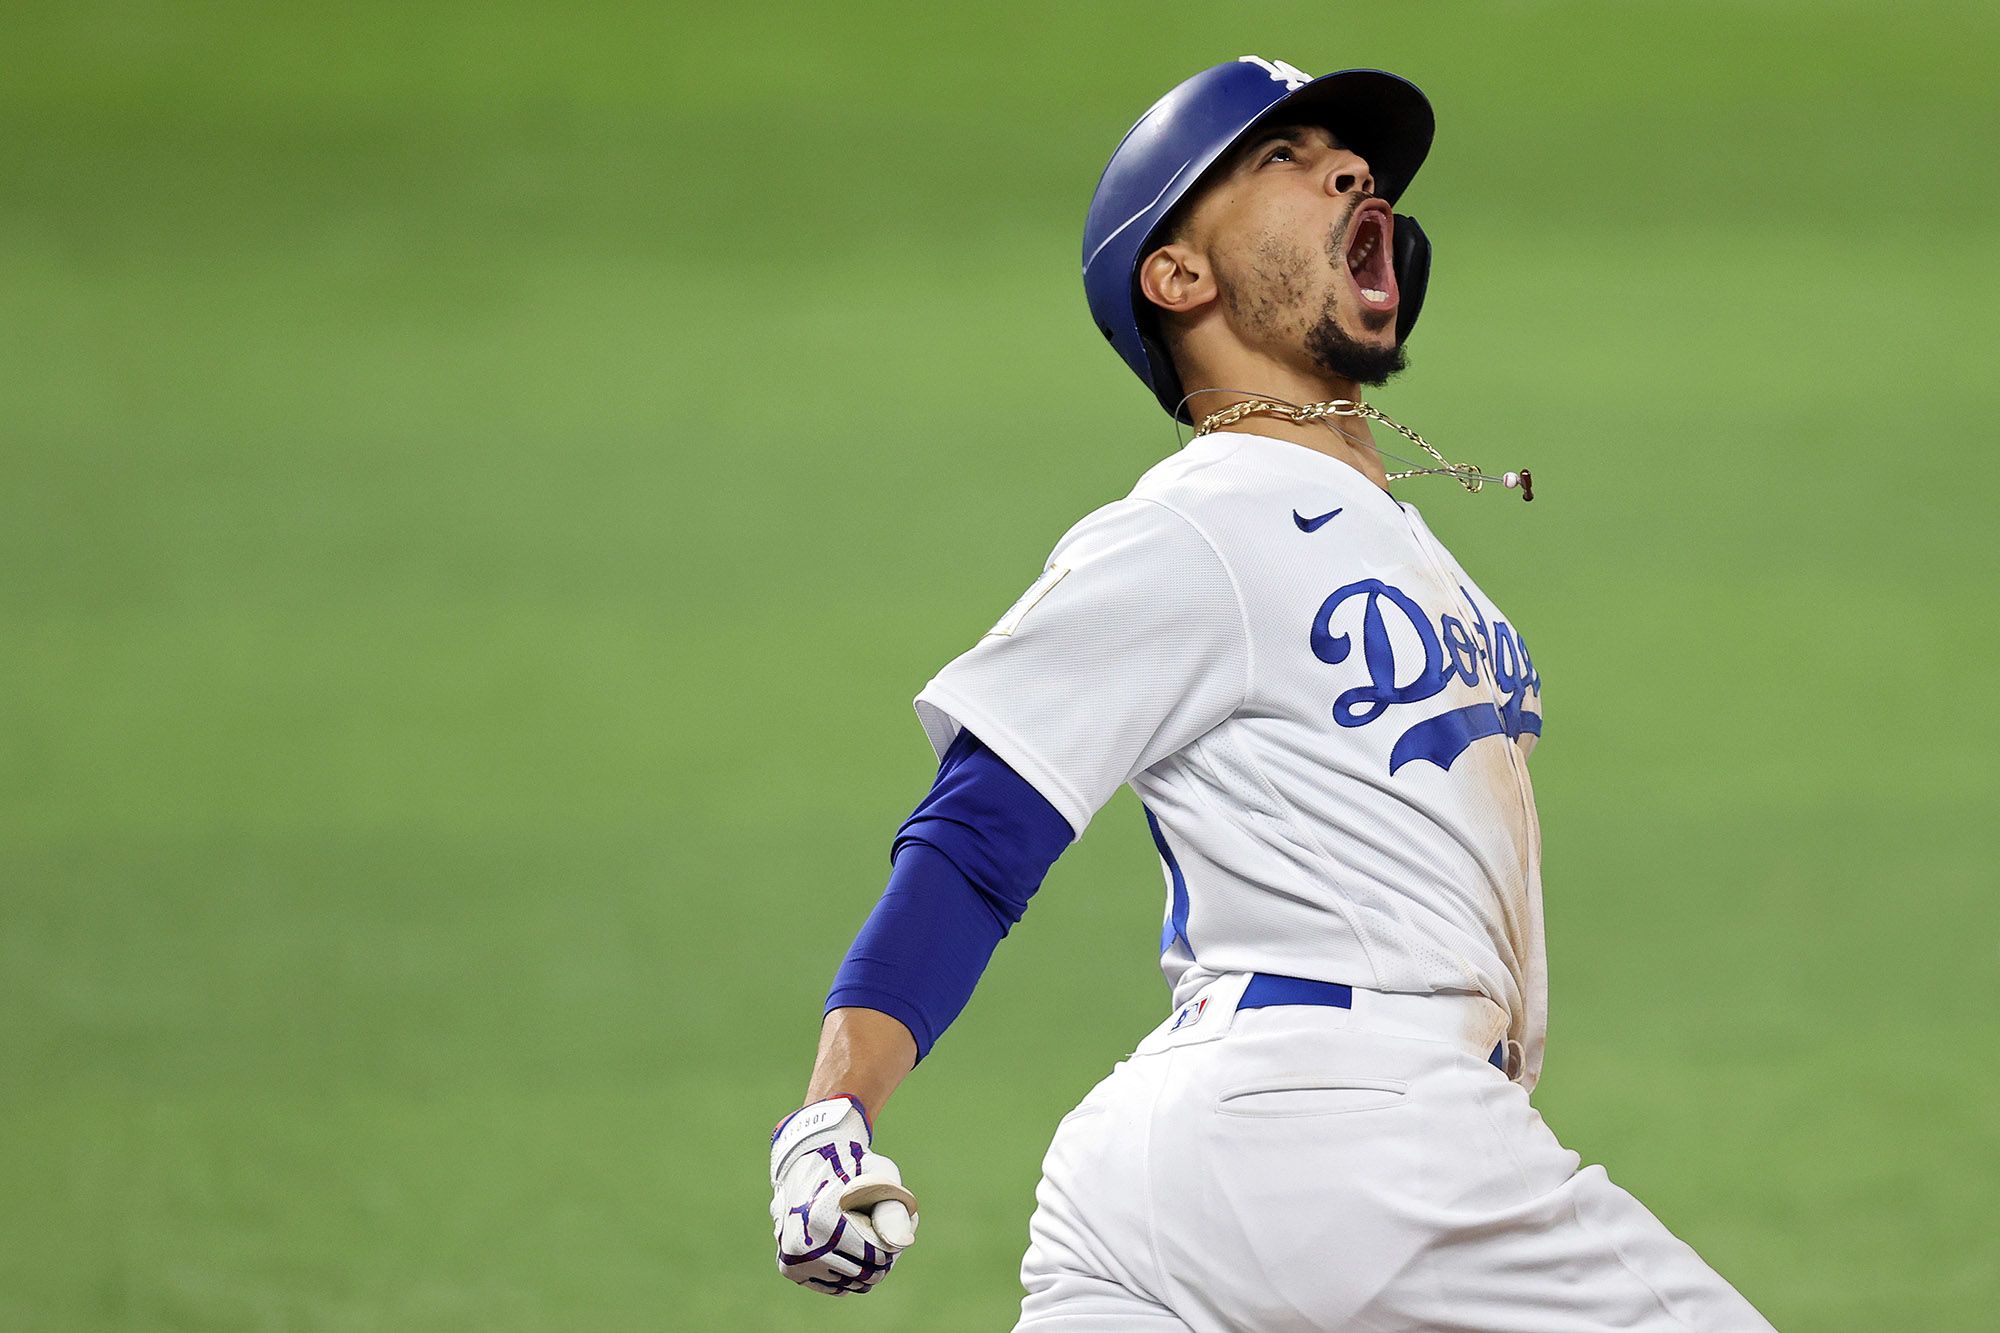 Rays slide one past Dodgers